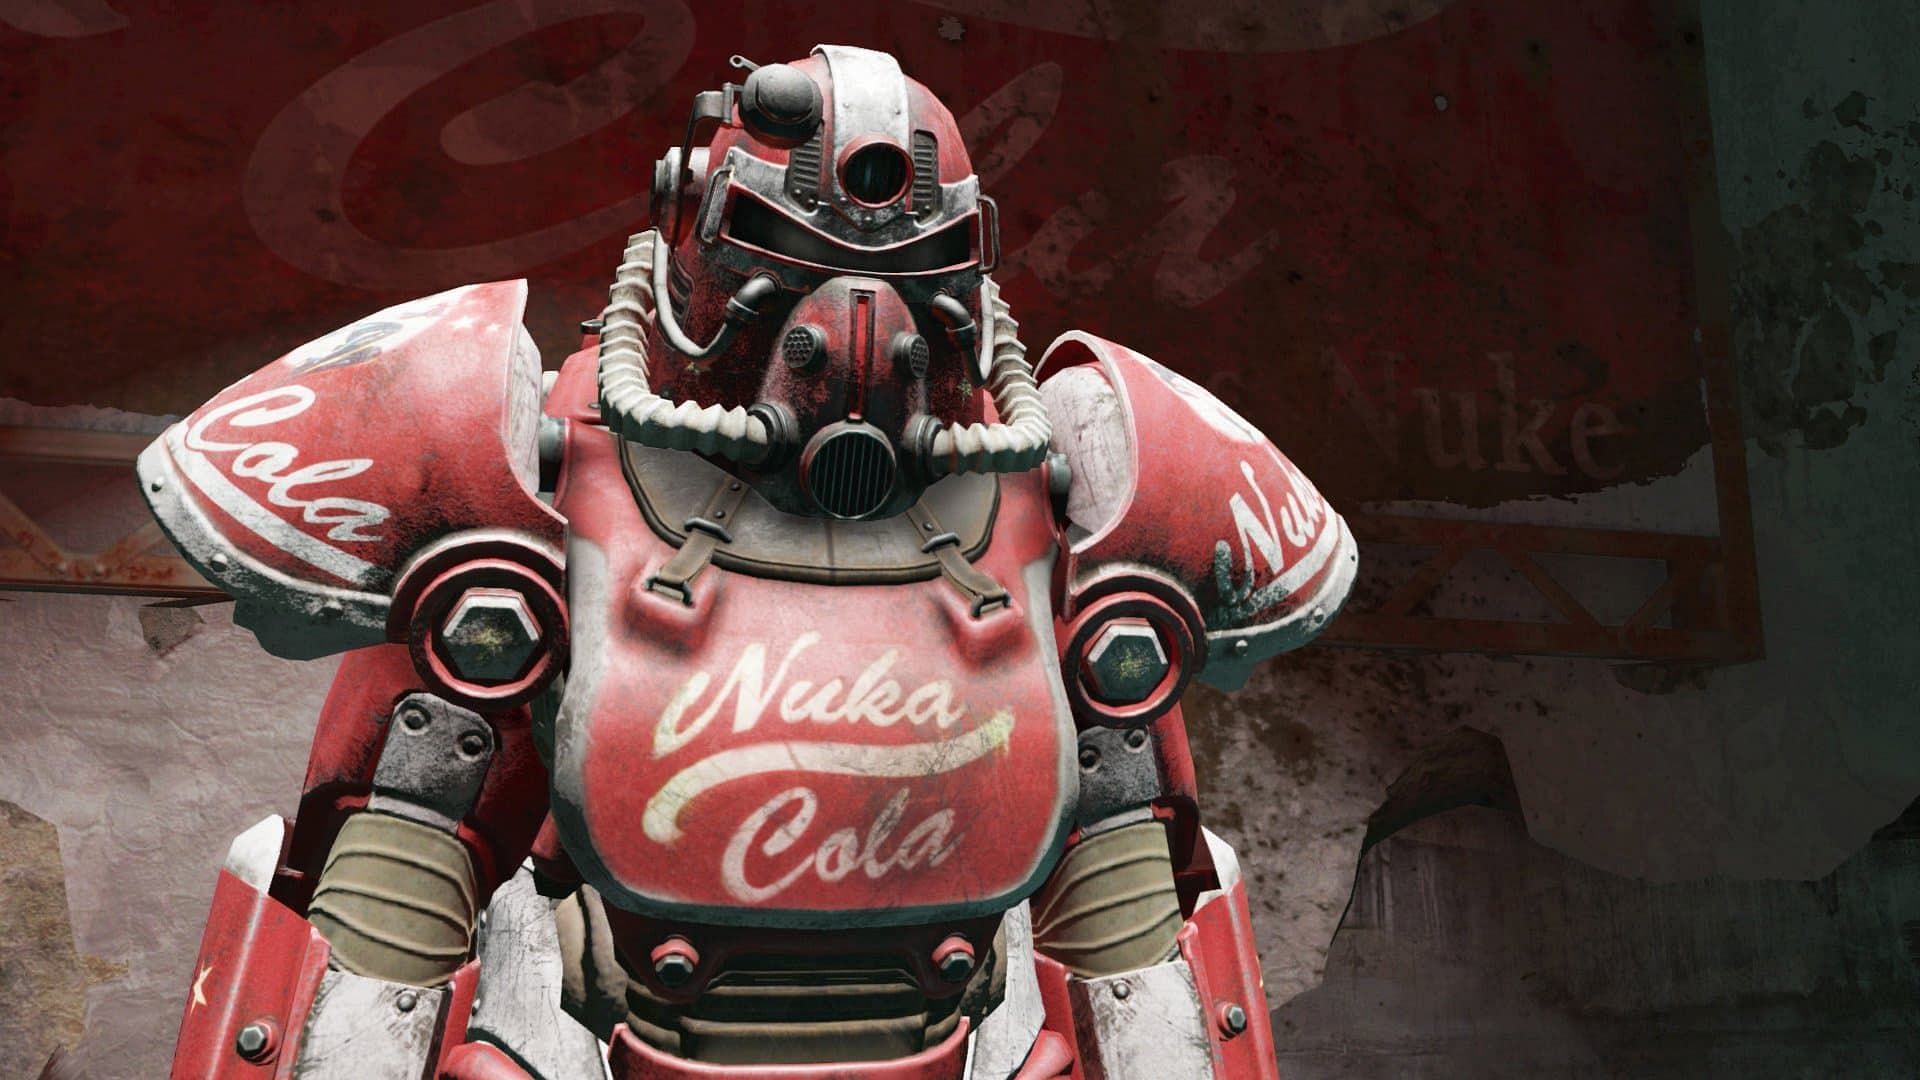 Nuka World is an amusement park turned raider settlement in Fallout 4 (Image via Bethesda Game Studios)